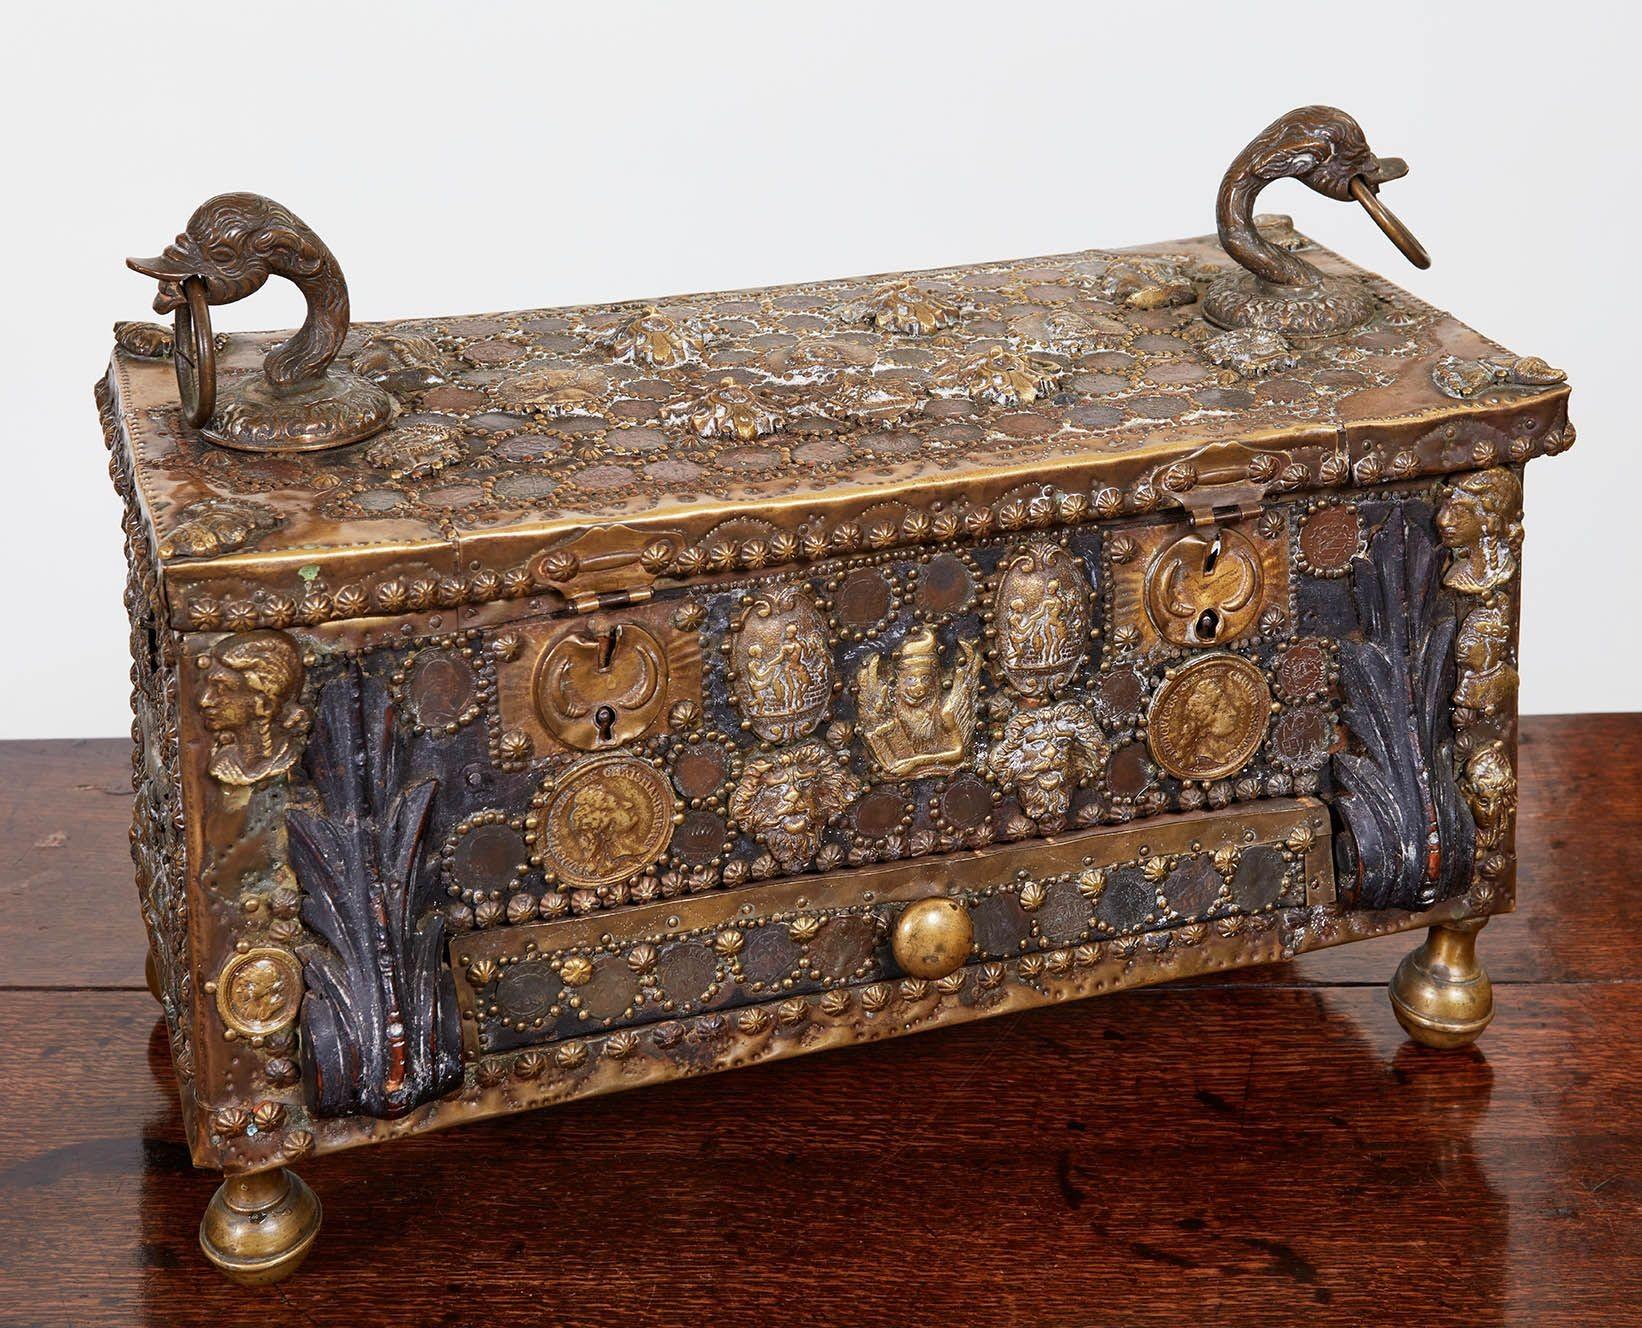 A Venetian gondolier's coin-encrusted money box consisting of a leather clad wooden case profusely decorated with brass studding, applique period coins, busts and masks, carved wooden corbels and two fabulous goose-head ring mounts to top surface.